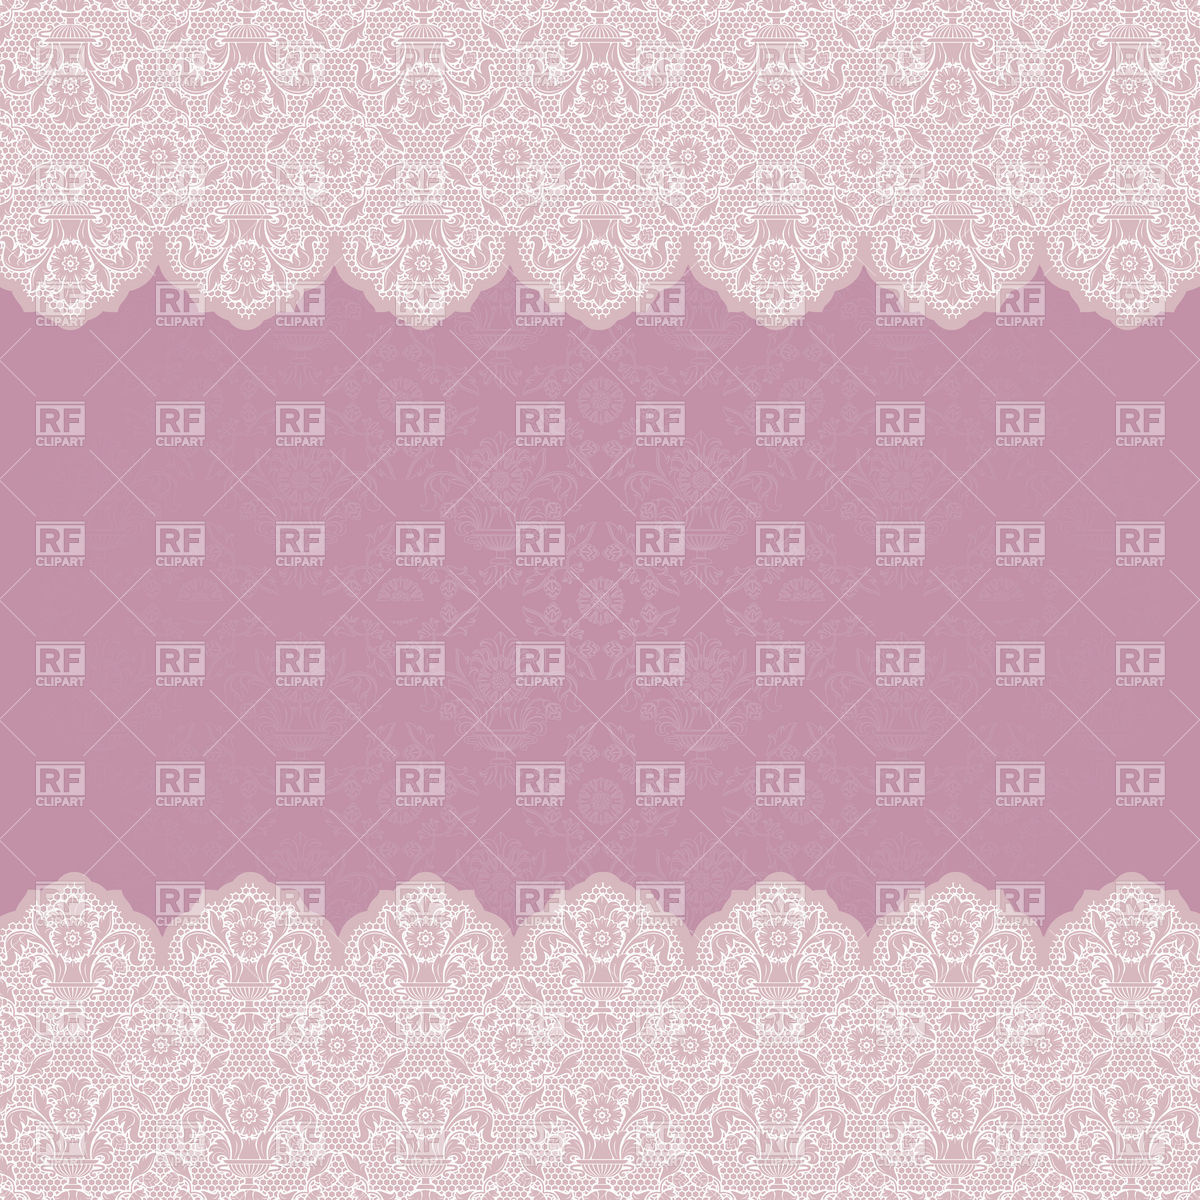 Lilac vintage wallpaper with lacy border download royalty free